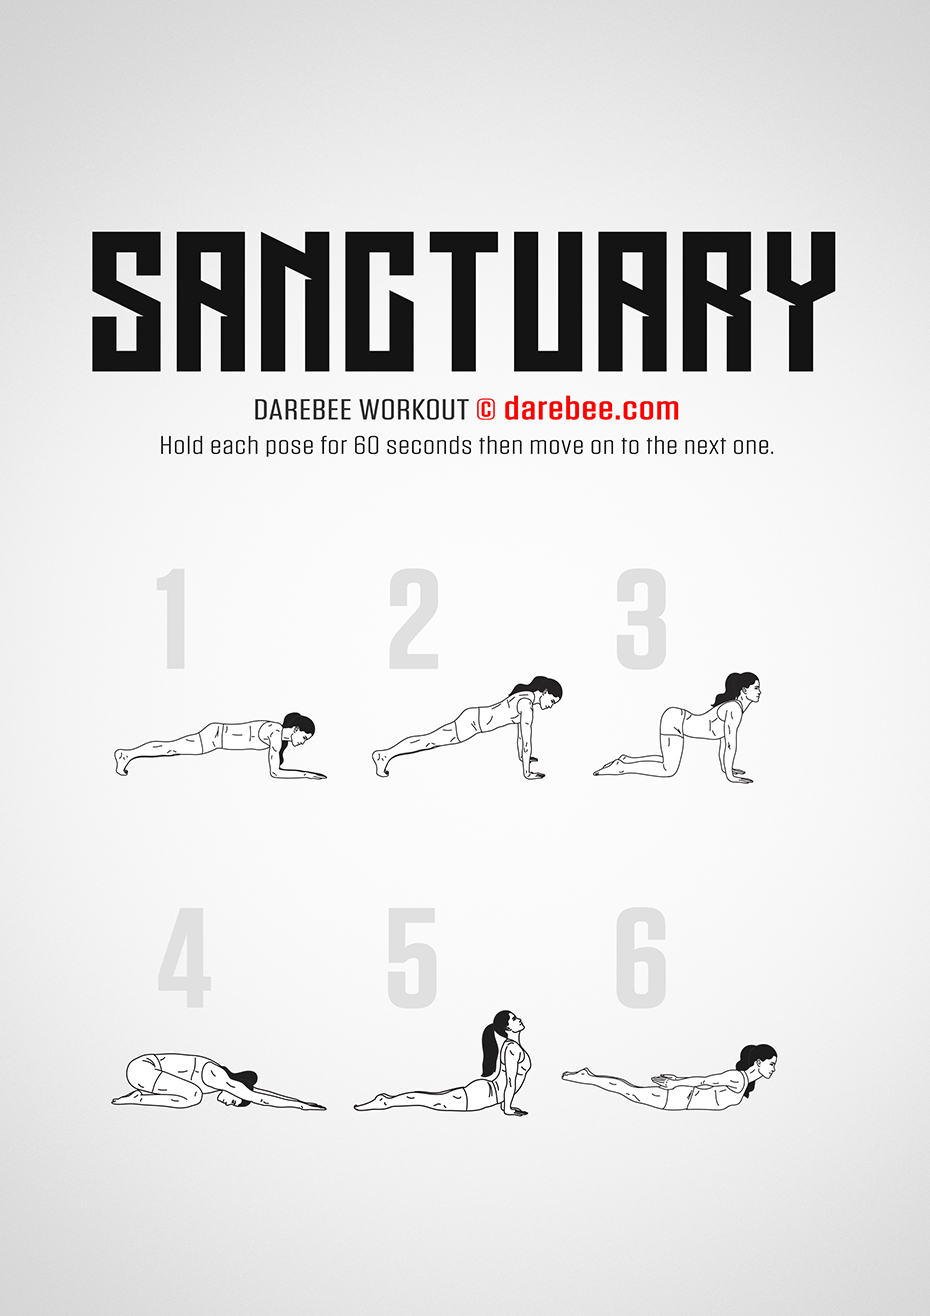 Sanctuary is a Darebee home fitness no-equipment bodyweight workout that works your abs, core and back for a healthier, stronger you.